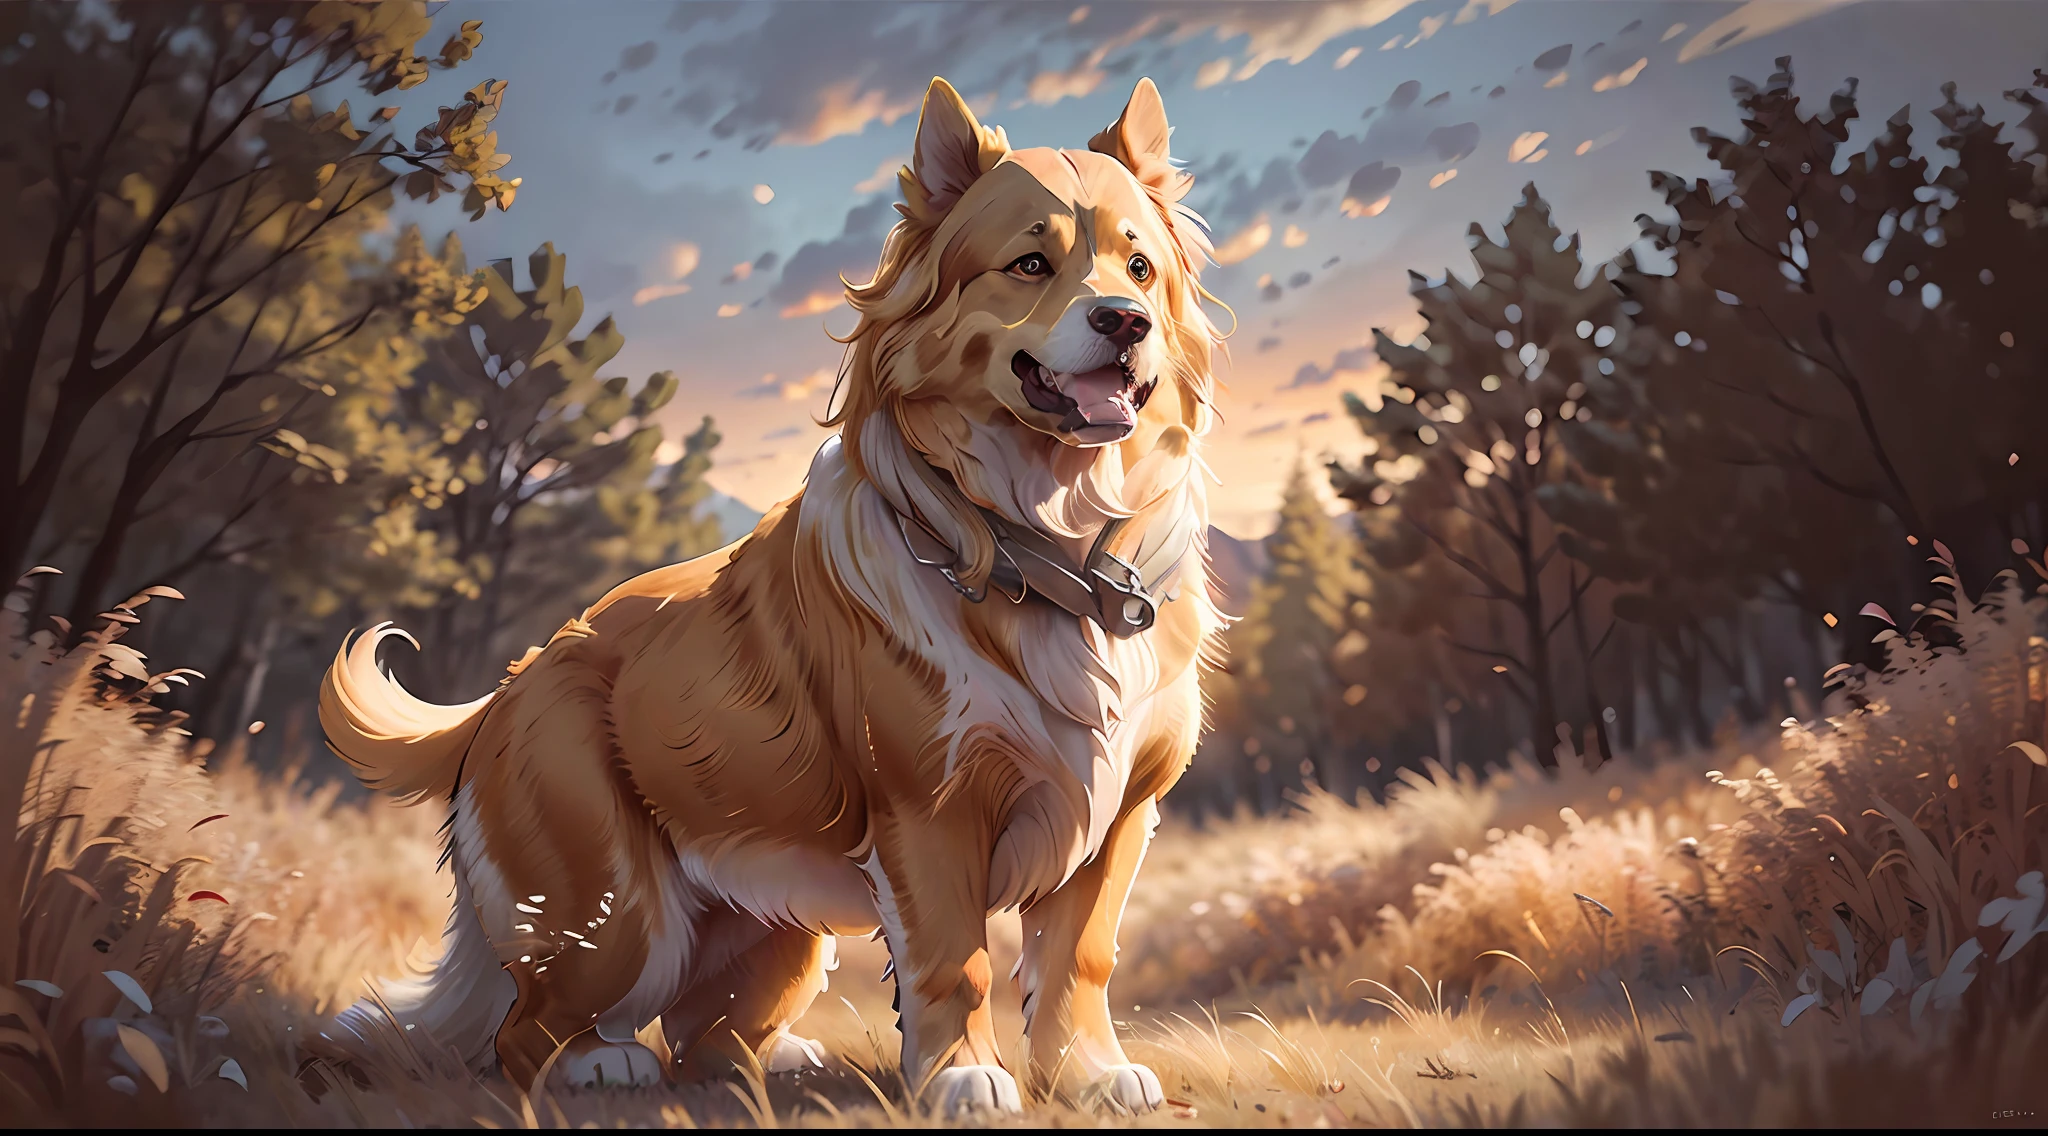 A realistic digital painting of a golden retriever standing on a grassy hill, with a beautiful sunset in the background. The dog has a friendly expression on its face and its fur is rendered in great detail, with shades of gold and cream. The sunlight illuminates the dog's face and chest, creating a warm and inviting atmosphere. The background consists of a vibrant orange and yellow sky, with clouds and trees in silhouette. The image is highly detailed and textured, with brush strokes visible throughout. The overall effect is a stunning and evocative portrayal of a beloved breed of dog in a beautiful natural setting. --auto --s2